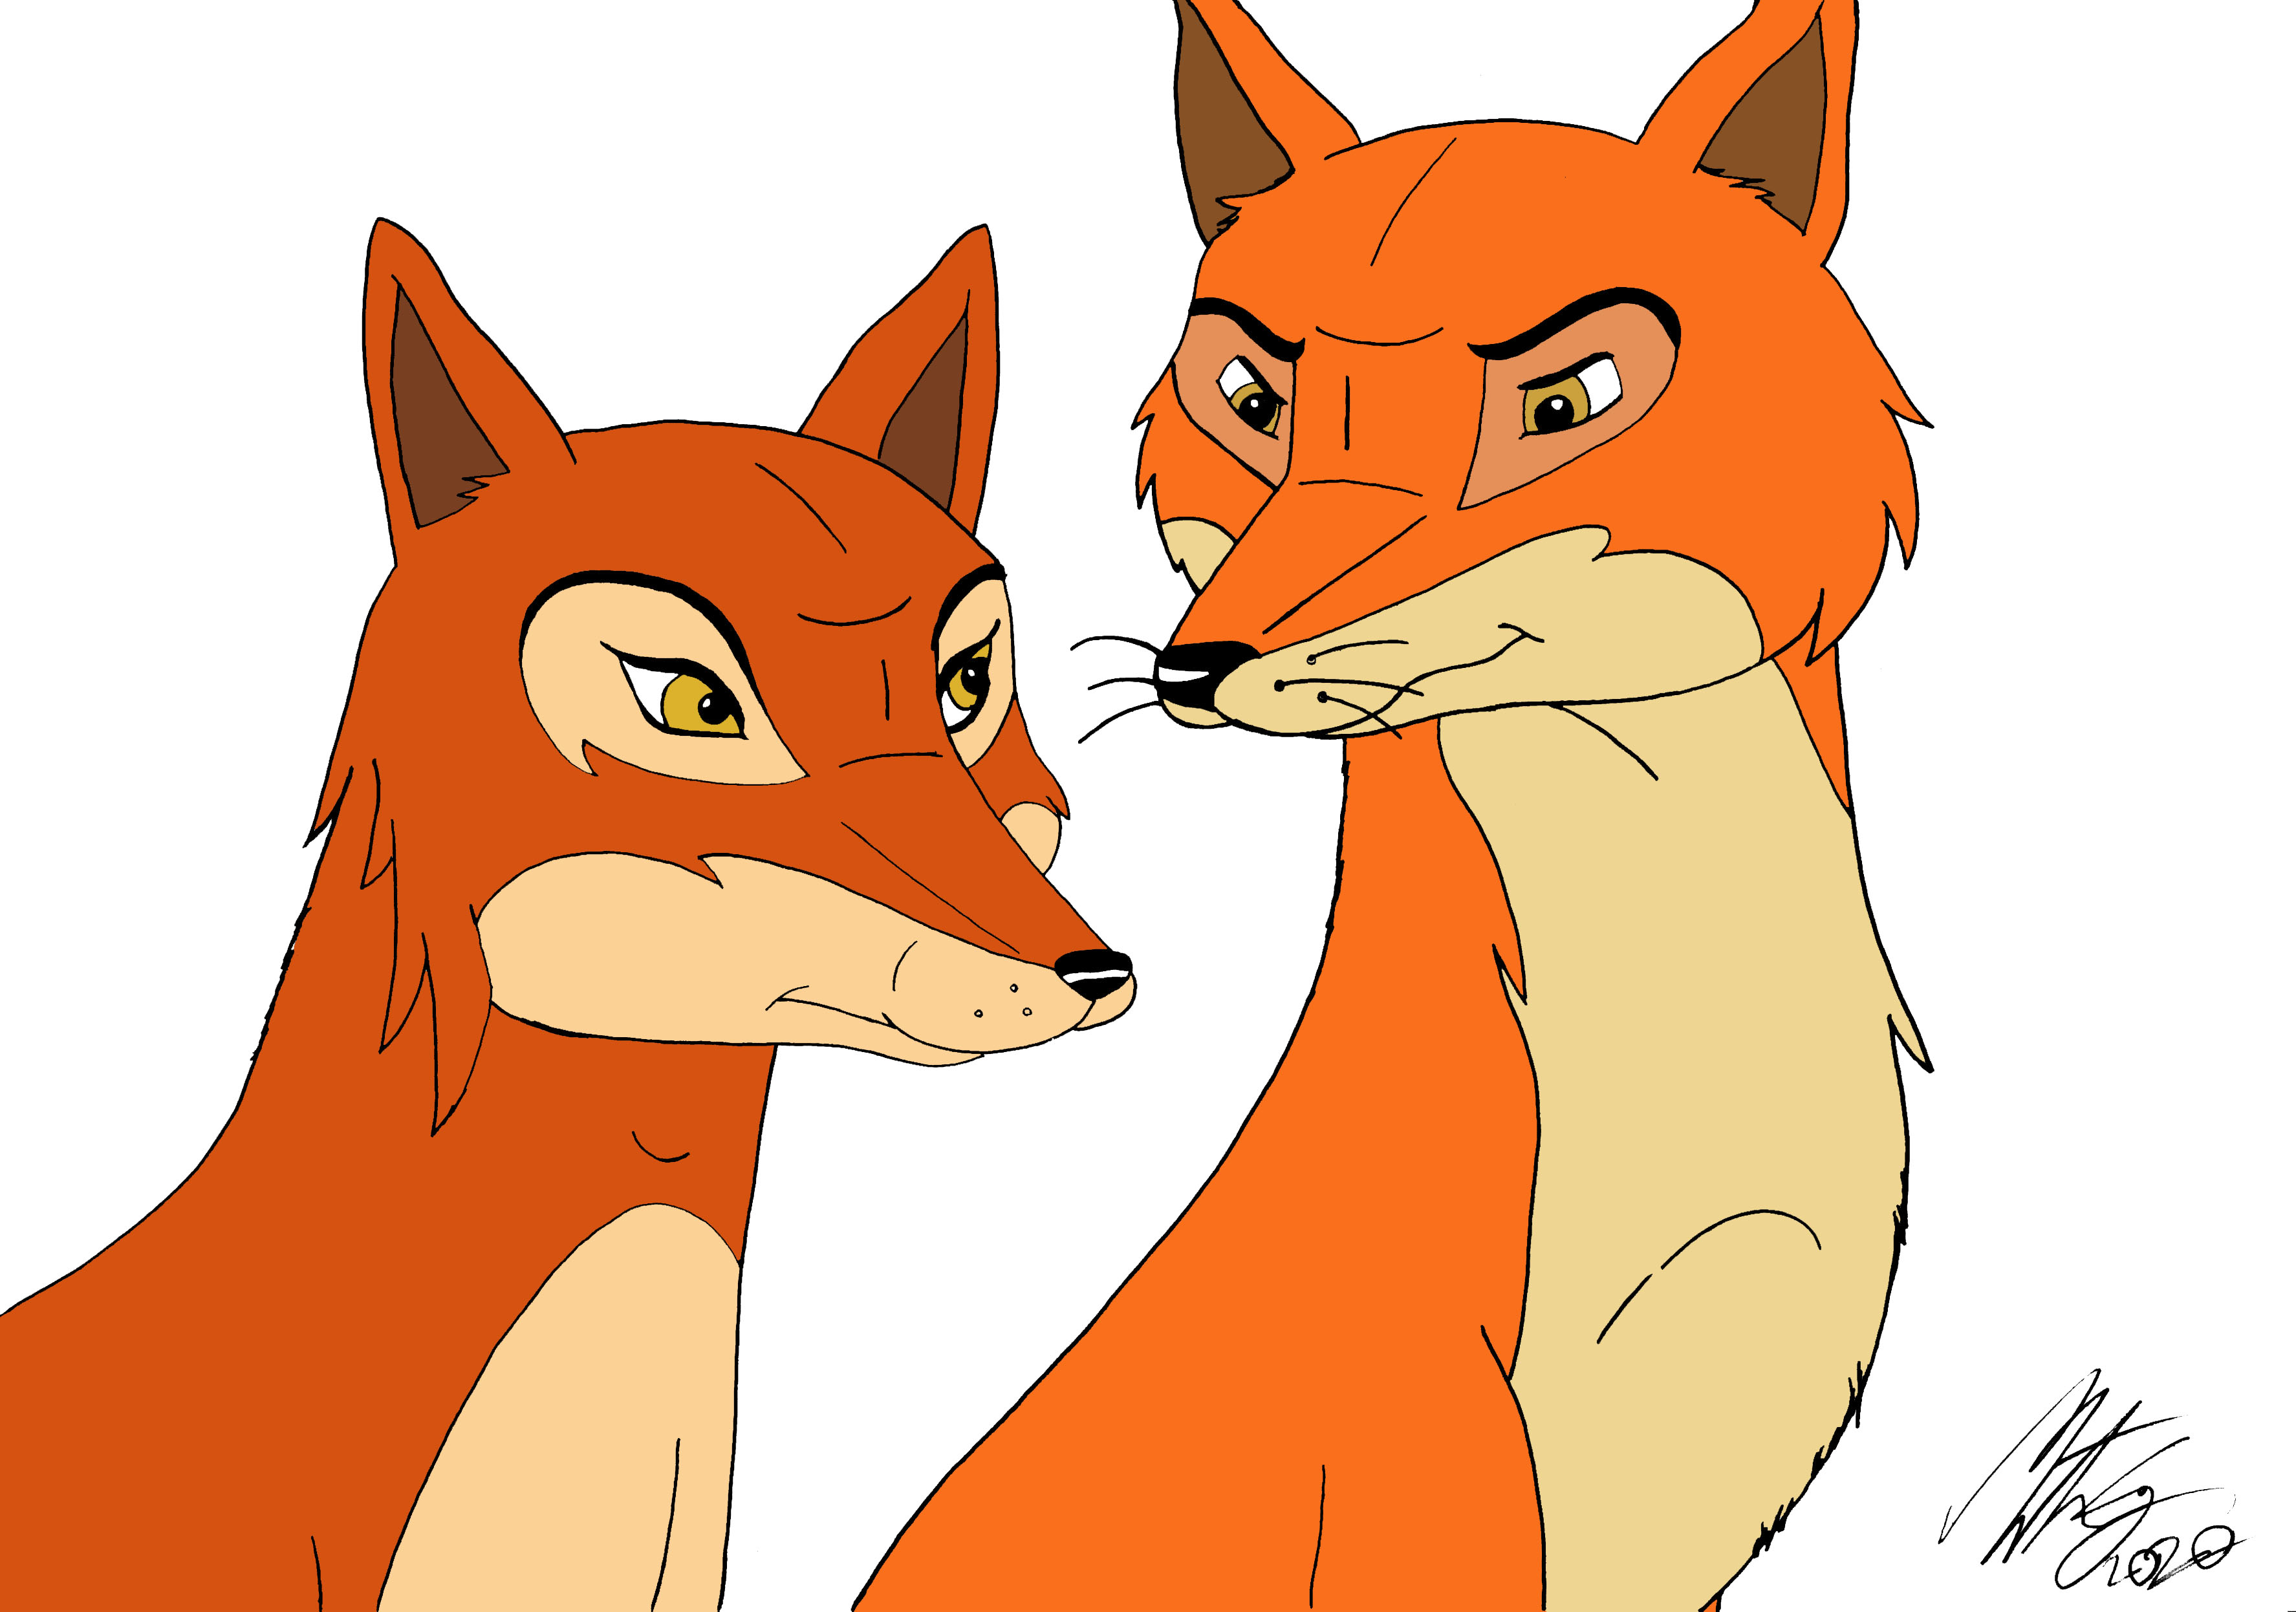 The Animals of Farthing Wood - Vixen and Fox by MortenEng21 on DeviantArt